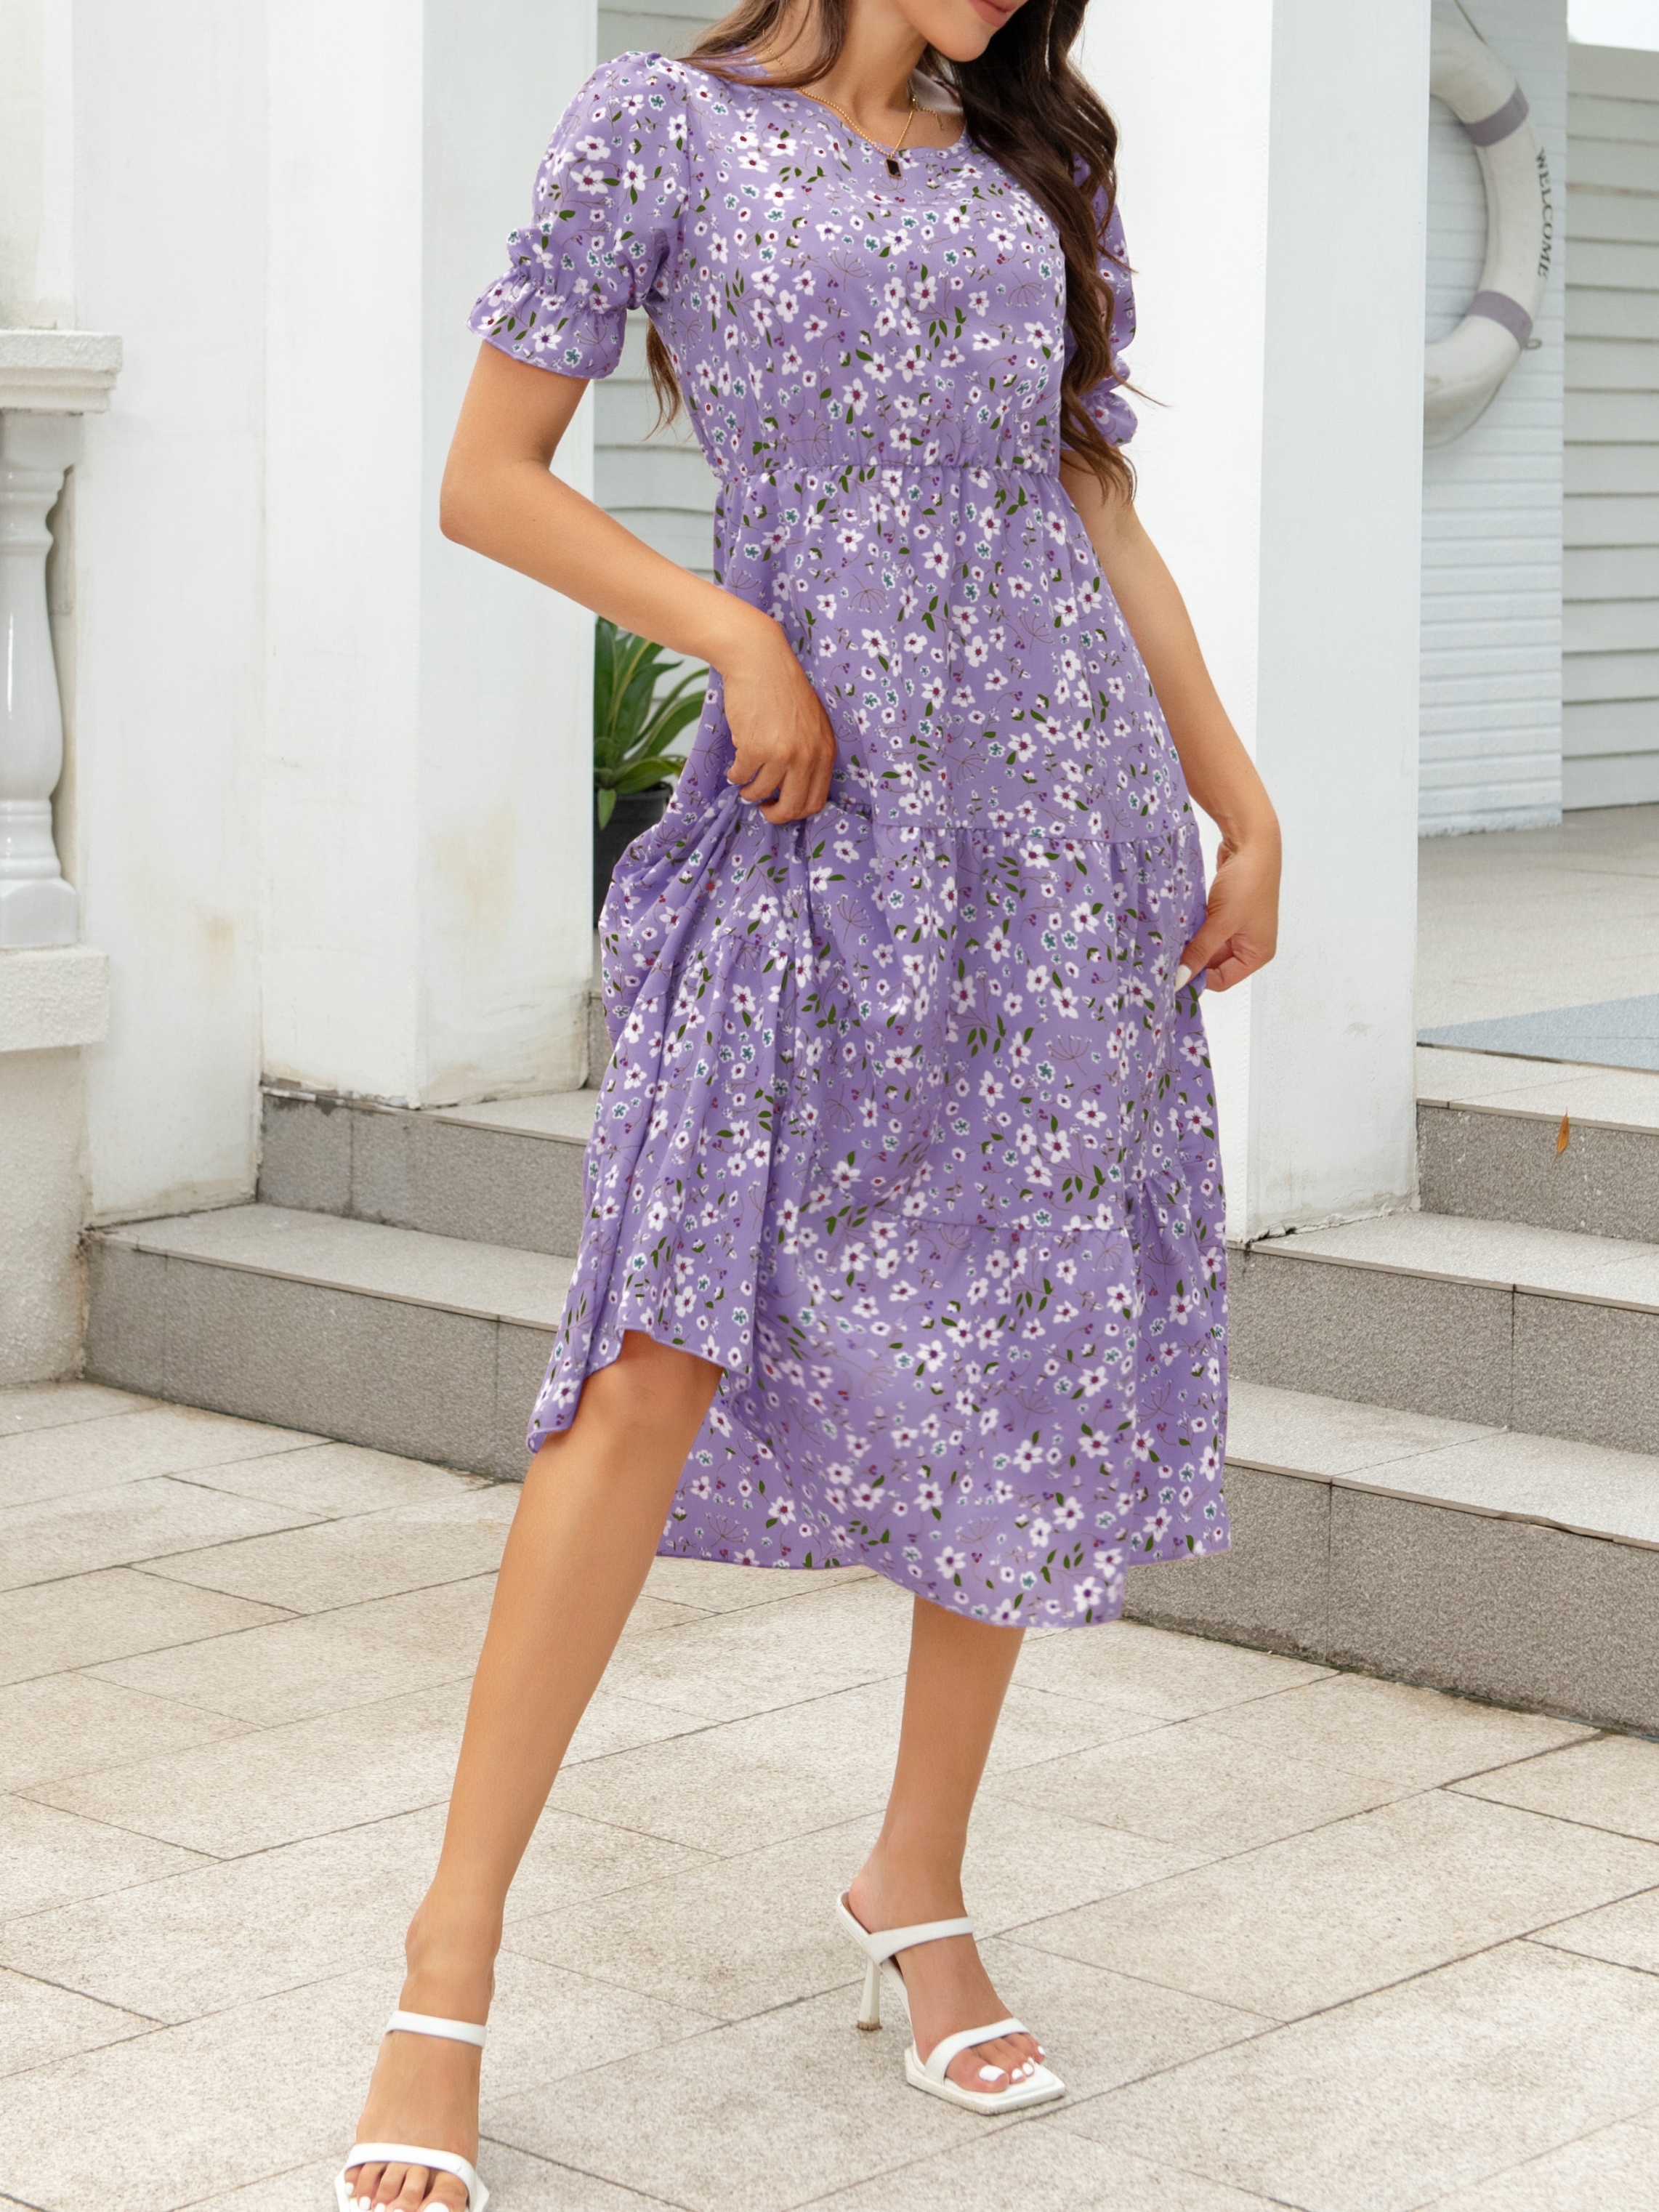  Dresses for Women - Ditsy Floral Print Ruffle Hem Dress (Color  : Purple, Size : Large) : Clothing, Shoes & Jewelry